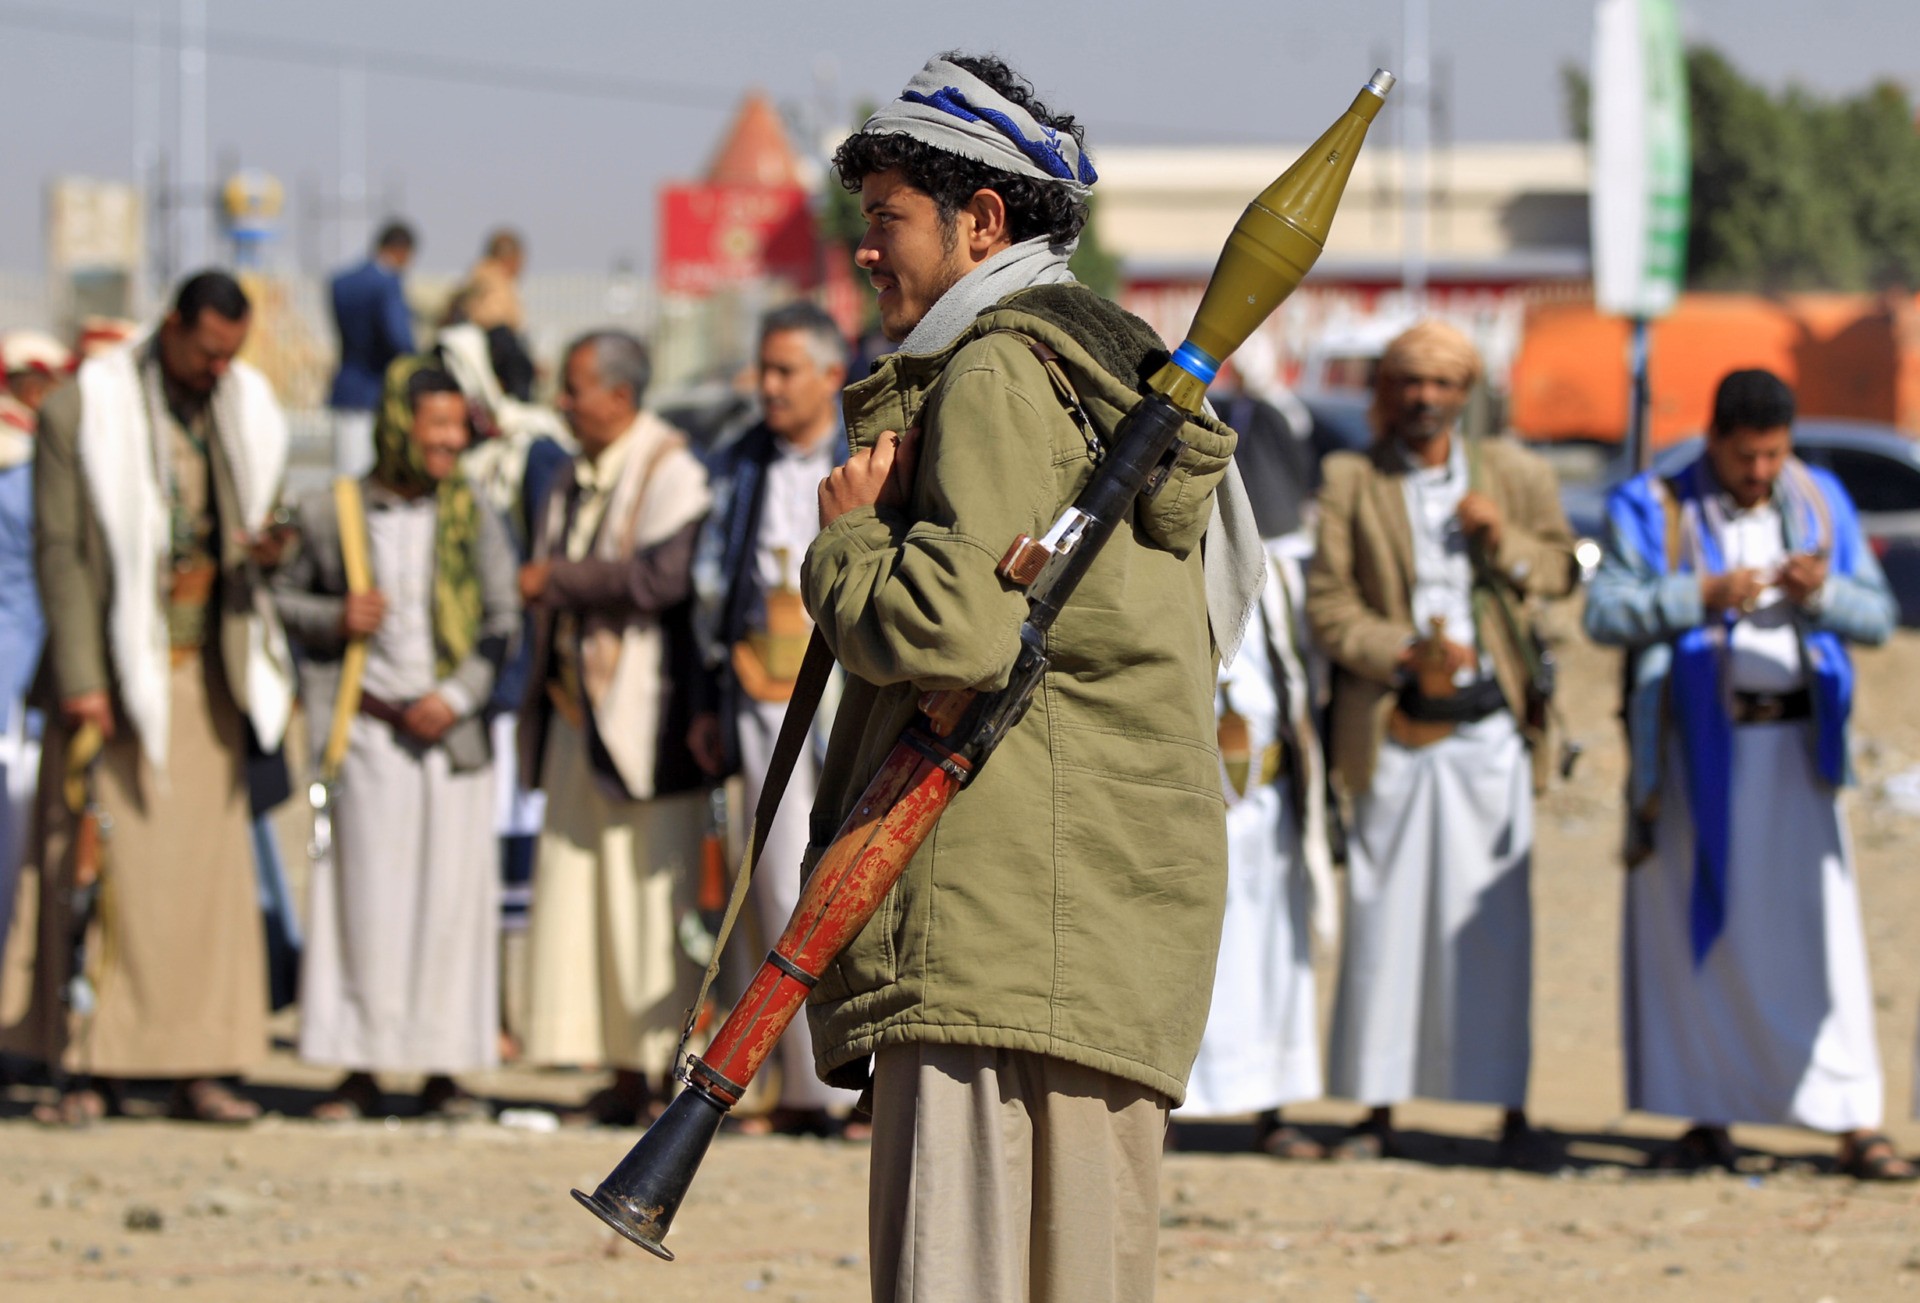 An armed Yemeni man holds a rocket launcher as people gather in the capital Sanaa to show their support to the Shiite Huthi movement against the Saudi-led intervention, on December 19, 2018. - A hard-won truce in the battleground Yemeni city of Hodeida will collapse if rebel violations persist and the United Nations does not intervene, the Saudi-led coalition said on December 19. UN observers are due in Yemen to head up monitoring teams made up of government and rebel representatives tasked with overseeing the implementation of the UN-brokered ceasefire that took effect on Tuesday. (Photo by Mohammed HUWAIS / AFP) (Photo credit should read MOHAMMED HUWAIS/AFP via Getty Images)